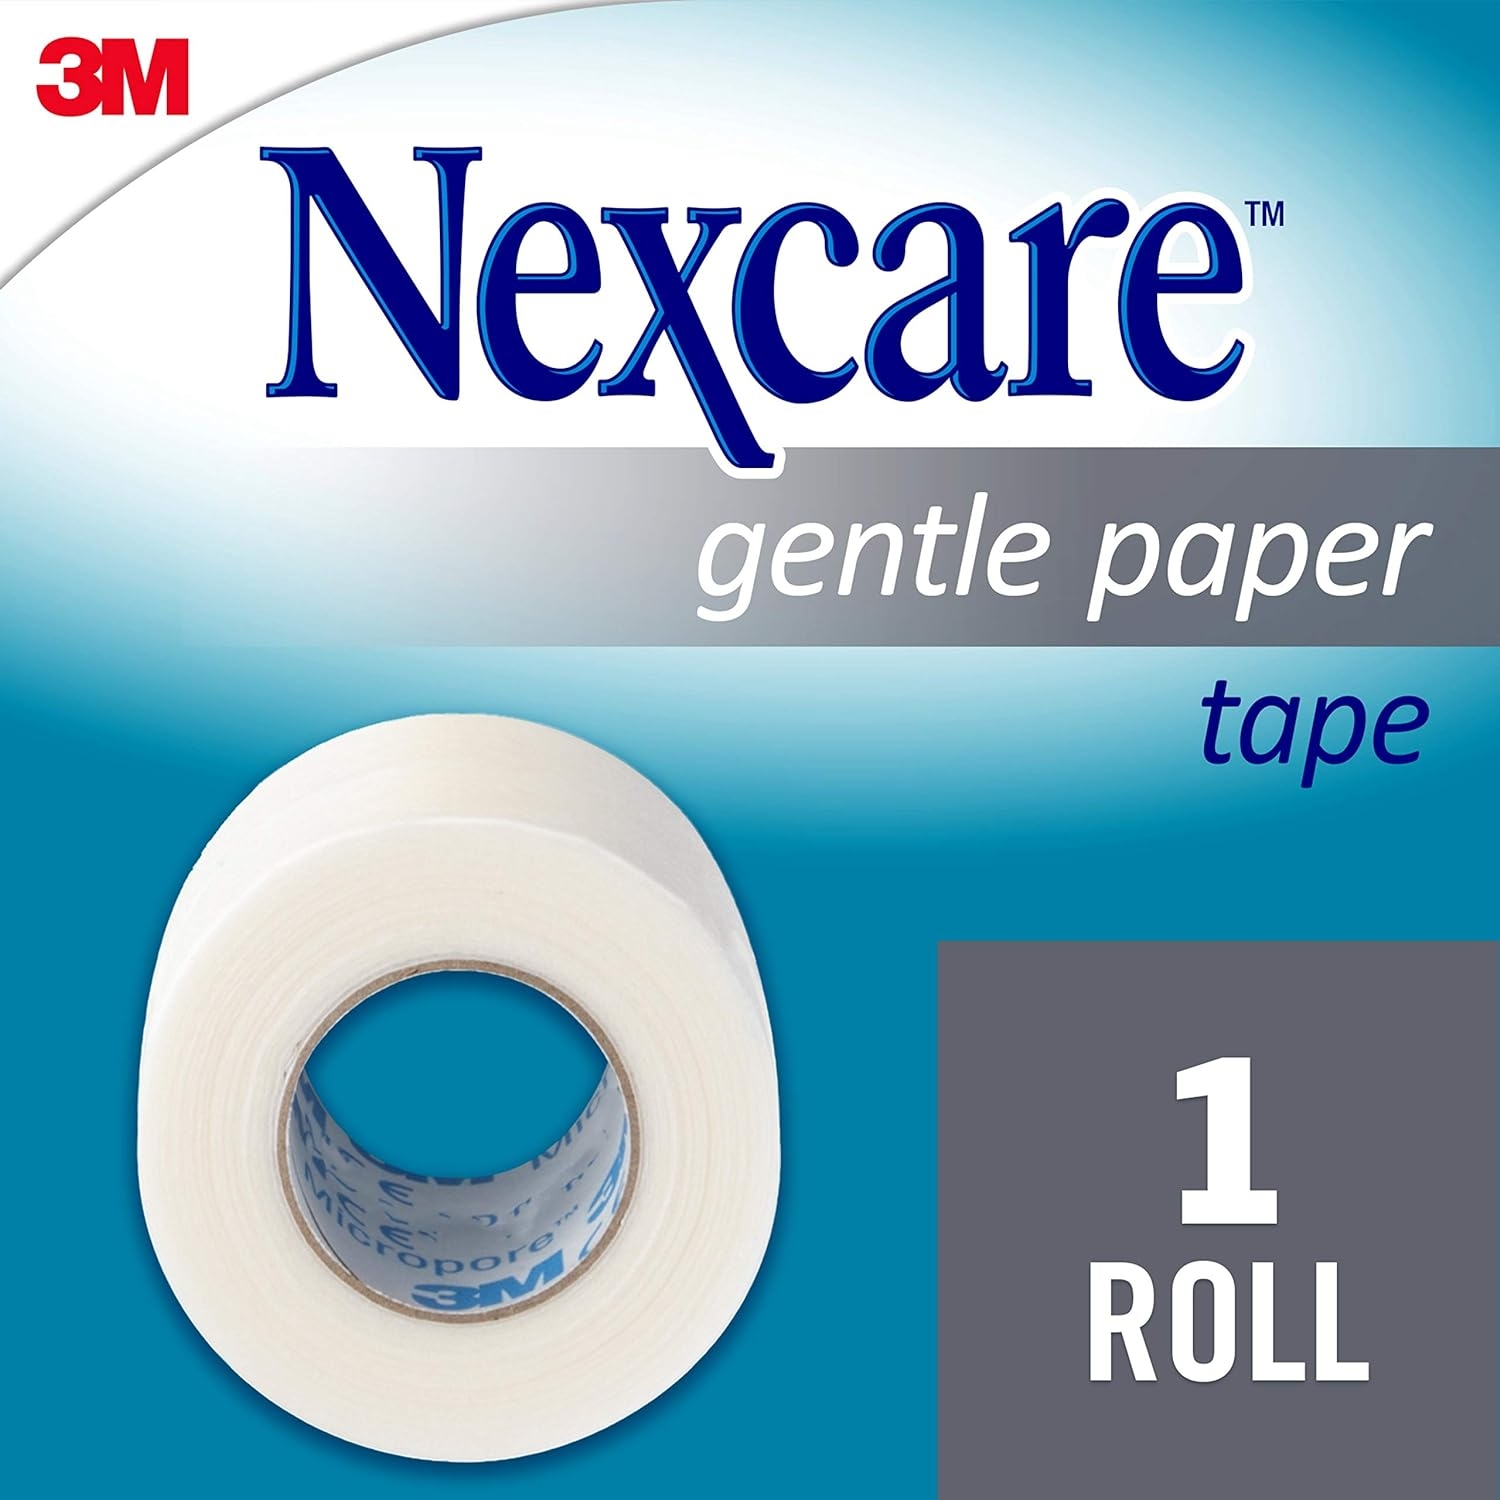 Nexcare Gentle Paper First Aid Tape, Tears Easily, For Frequent Gauze Changes, 1 Roll, 2"